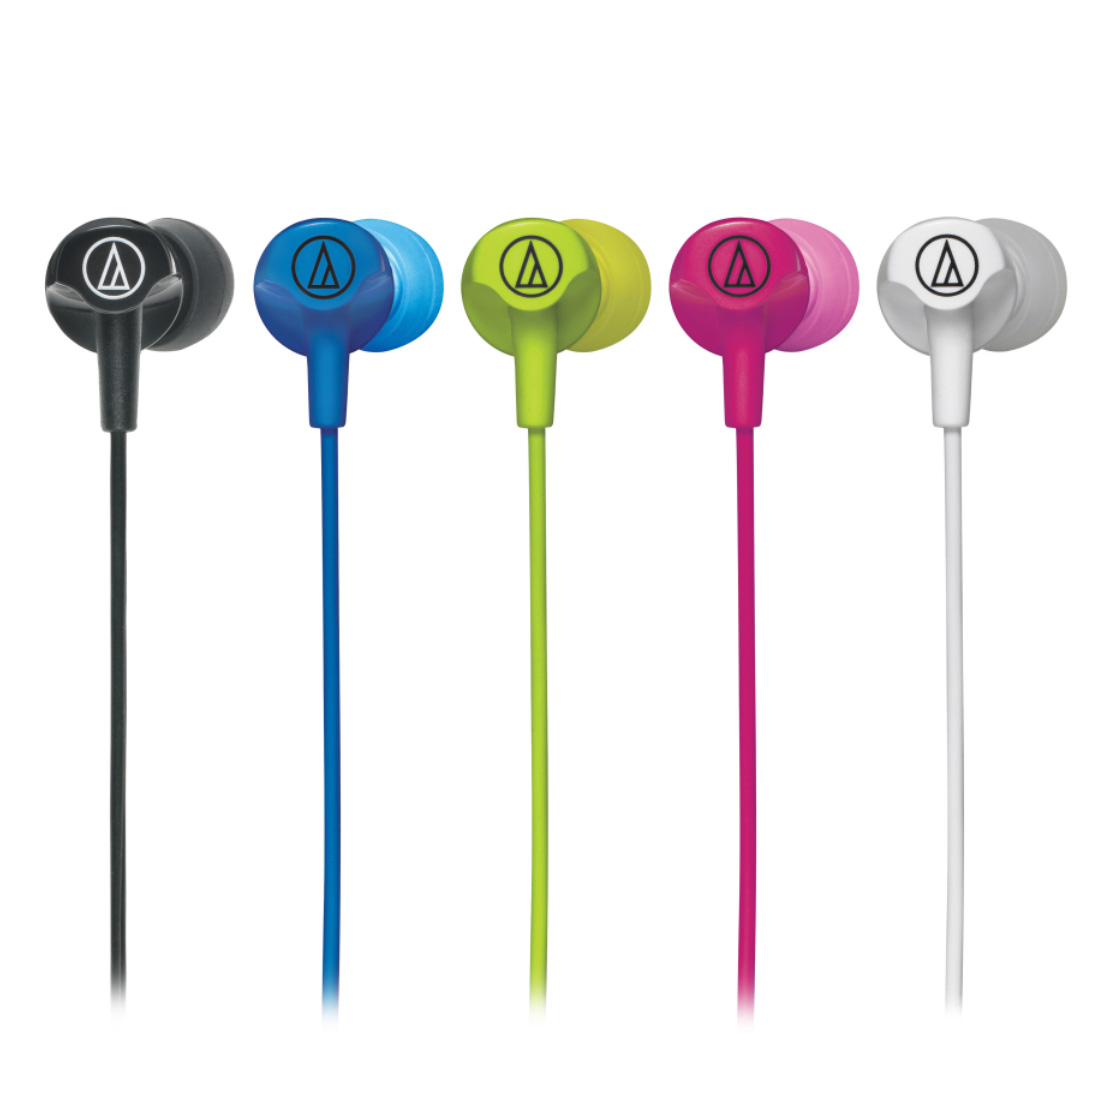 ATH-CLR100iS SonicFuel® In-ear Headphones with In-line Mic & Control